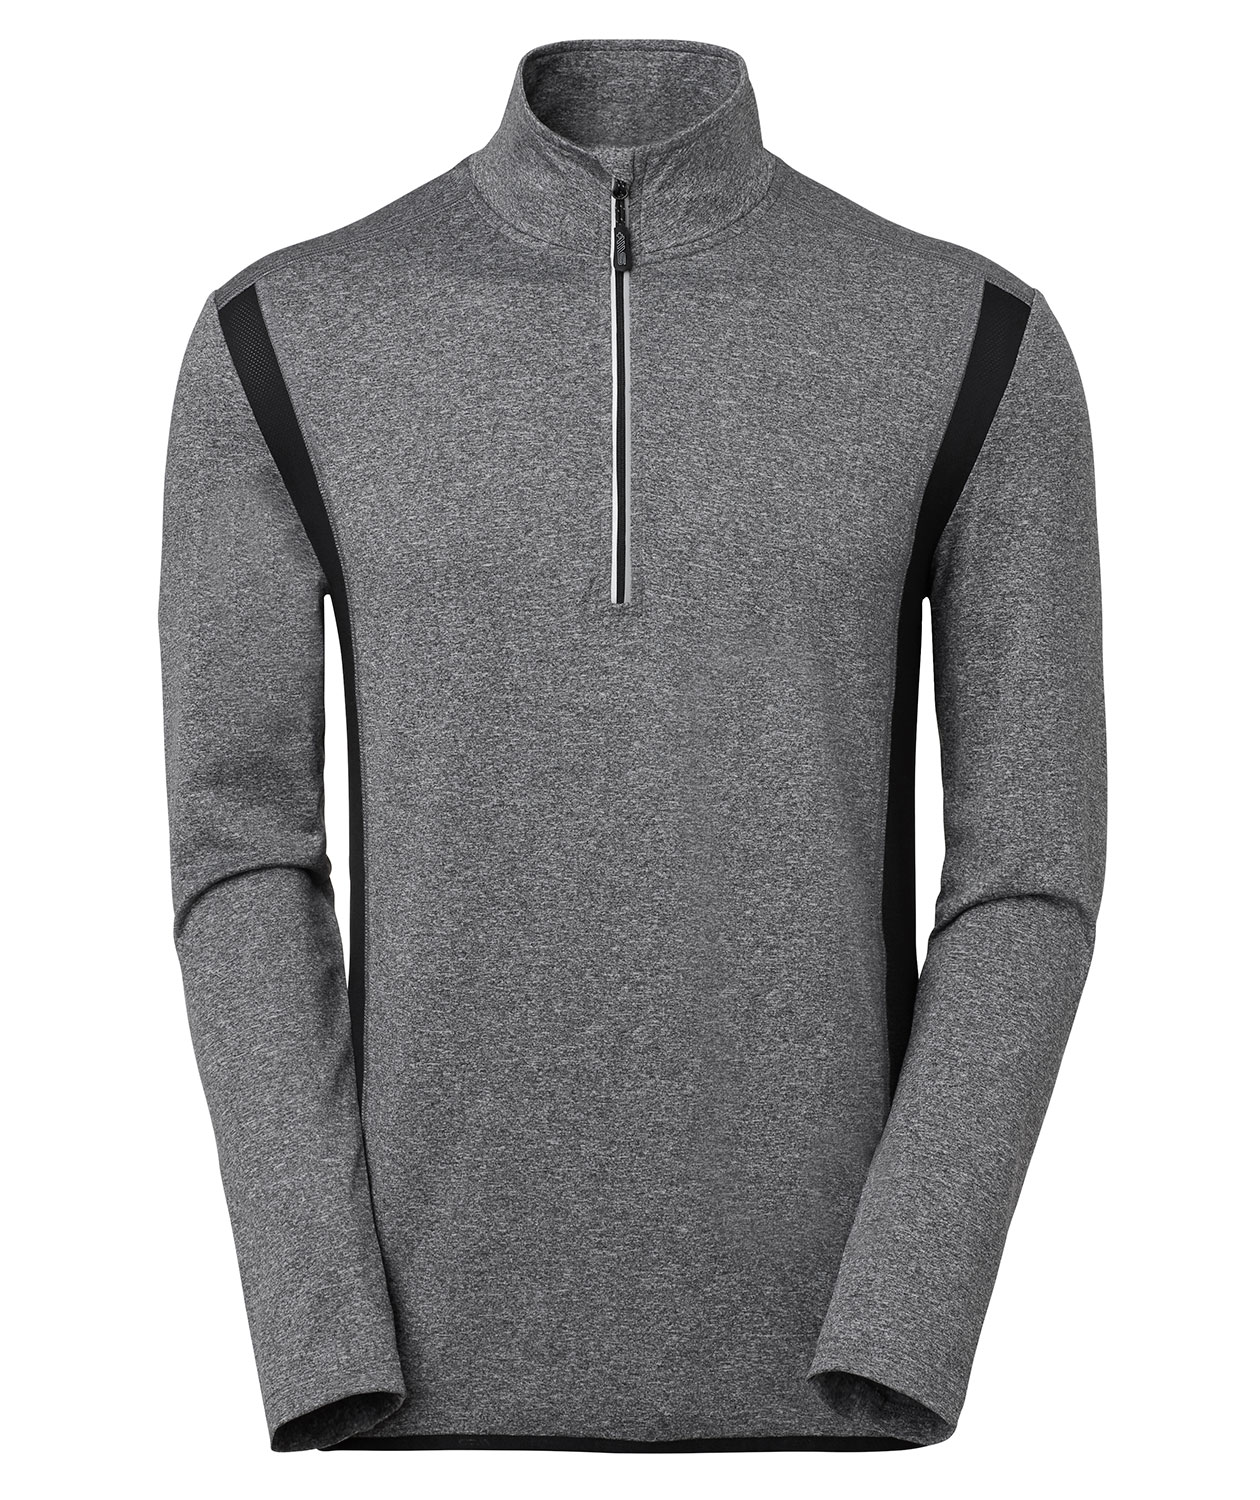 Buy South West half-zip sweater at Cheap-workwear.com